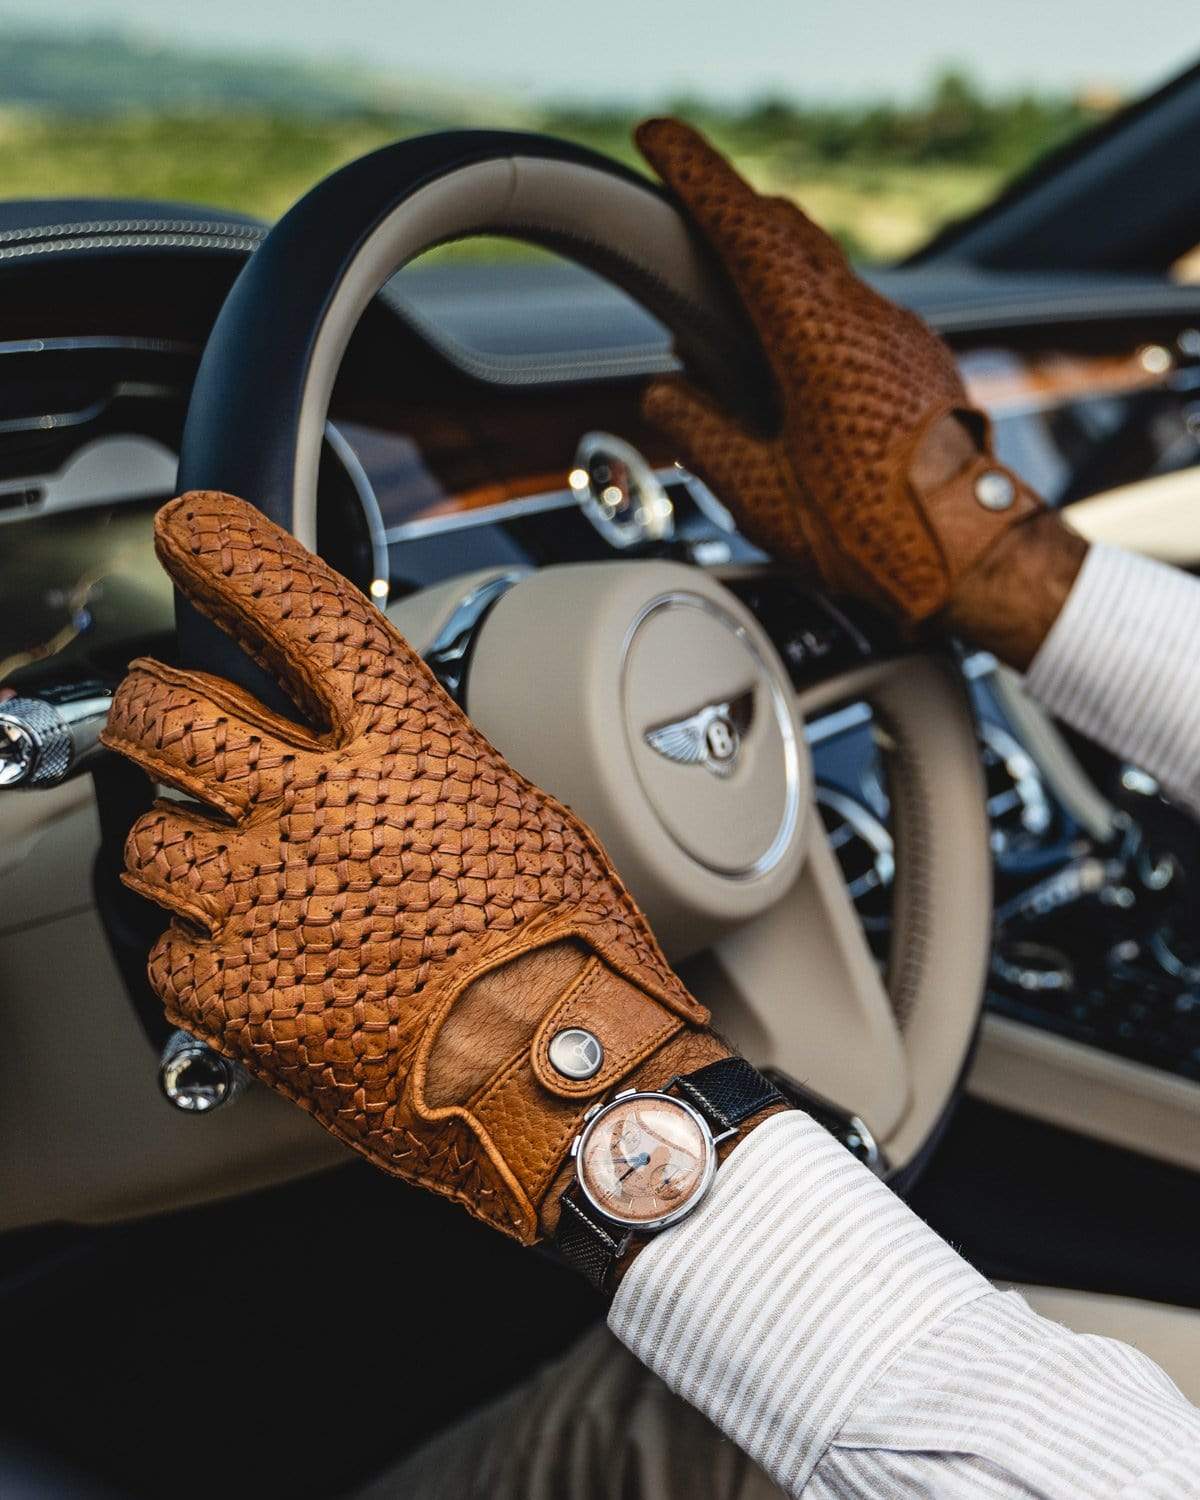 the-outlierman-gloves-bespoke-peccary-leather-driving-gloves-cork-tan-14859929649240.jpg